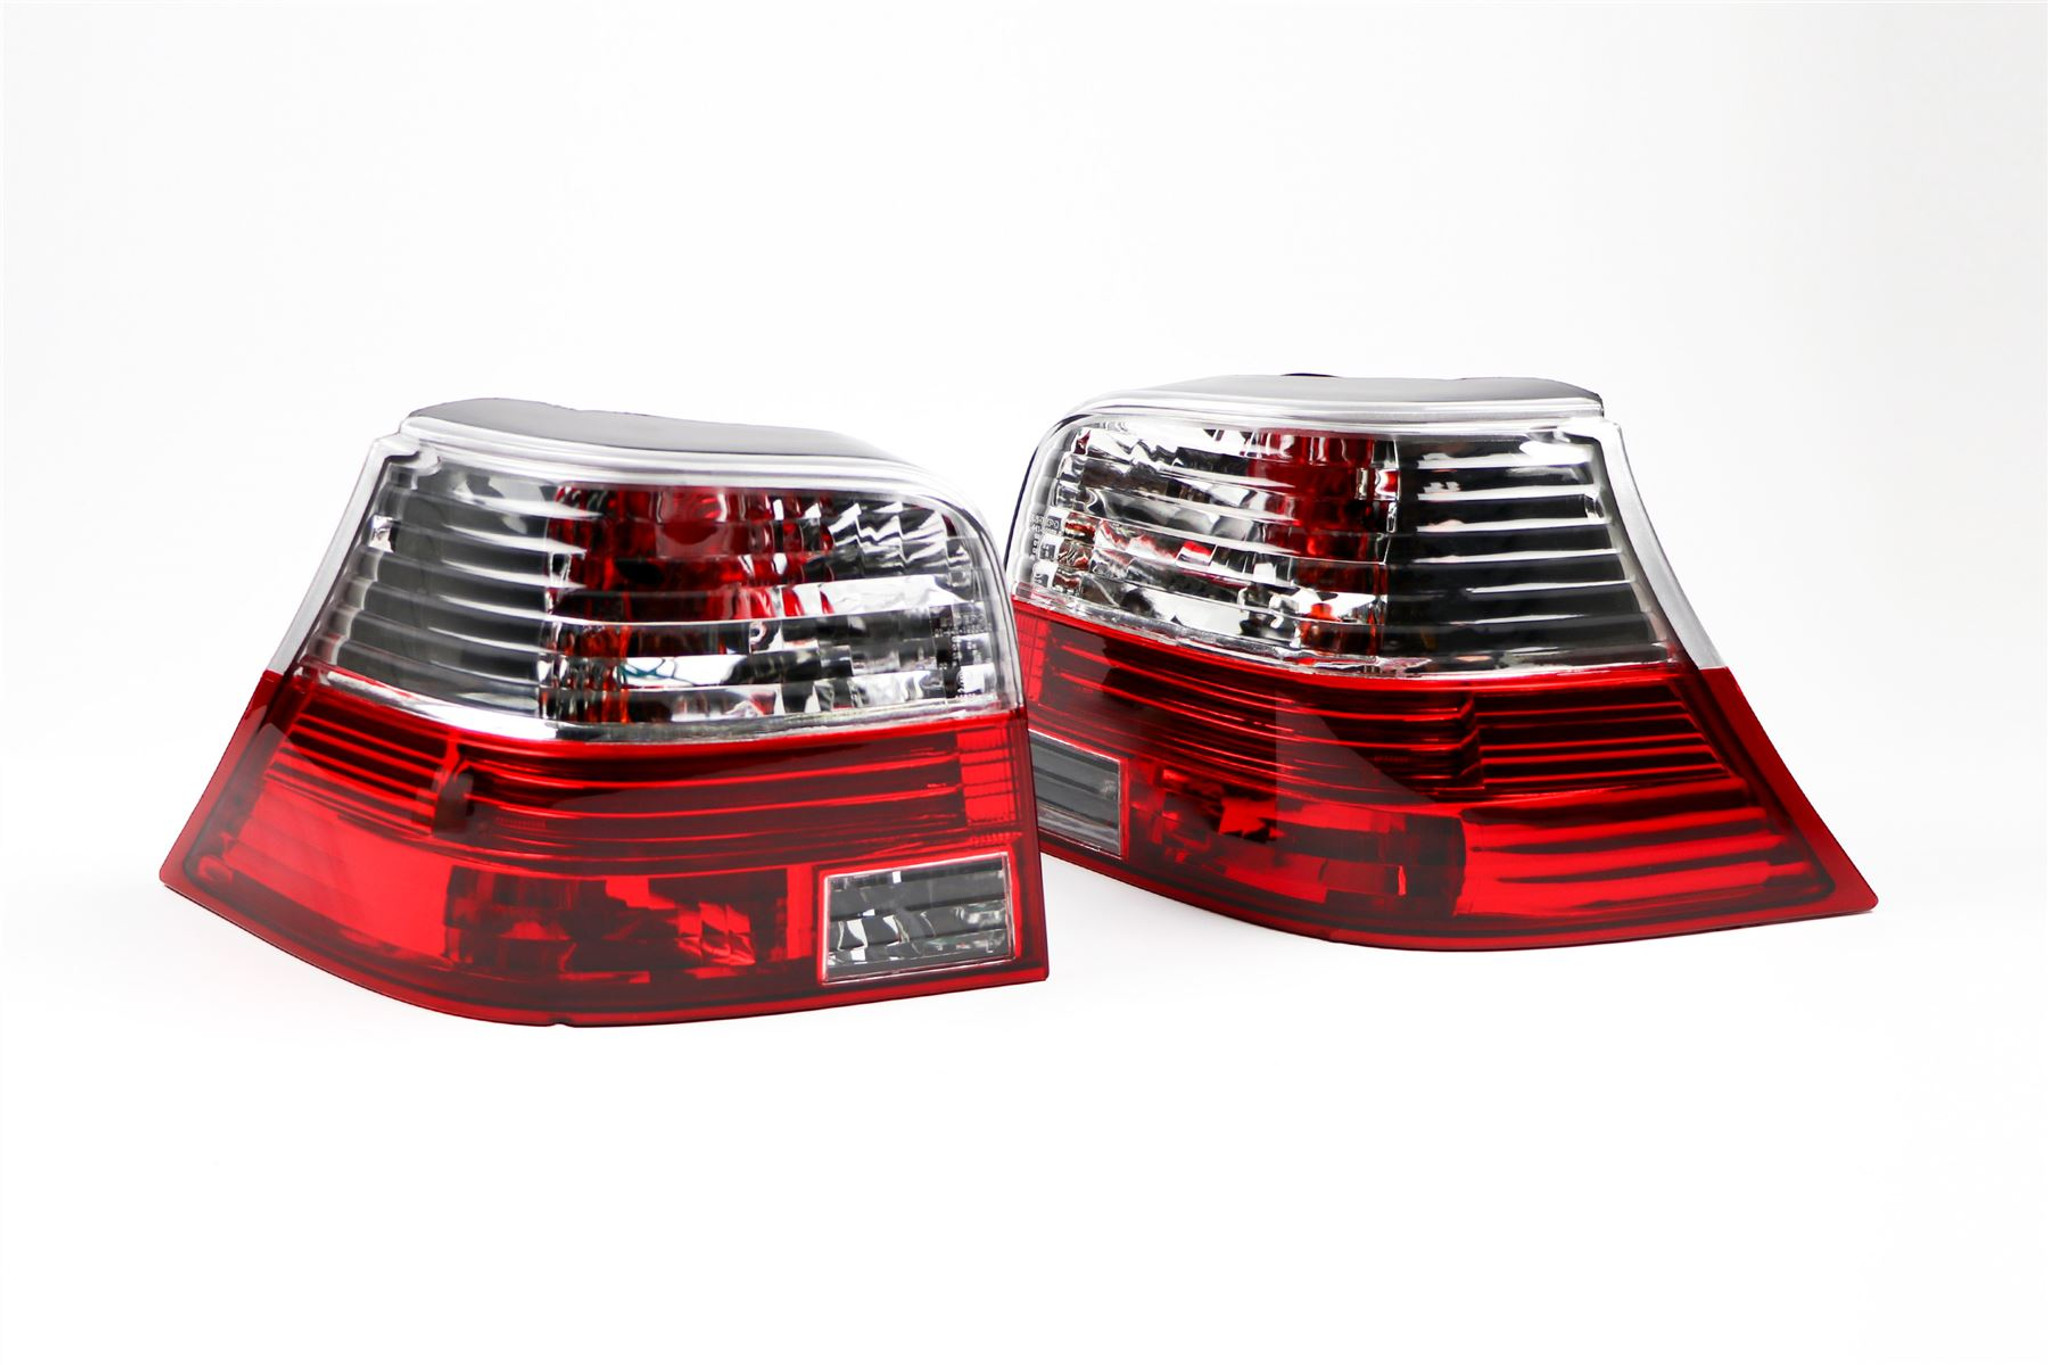 VW Golf Mk4 Hatchback 1998-2004 Upgrade Crystal Smoked tint Red Rear Tail  Lights